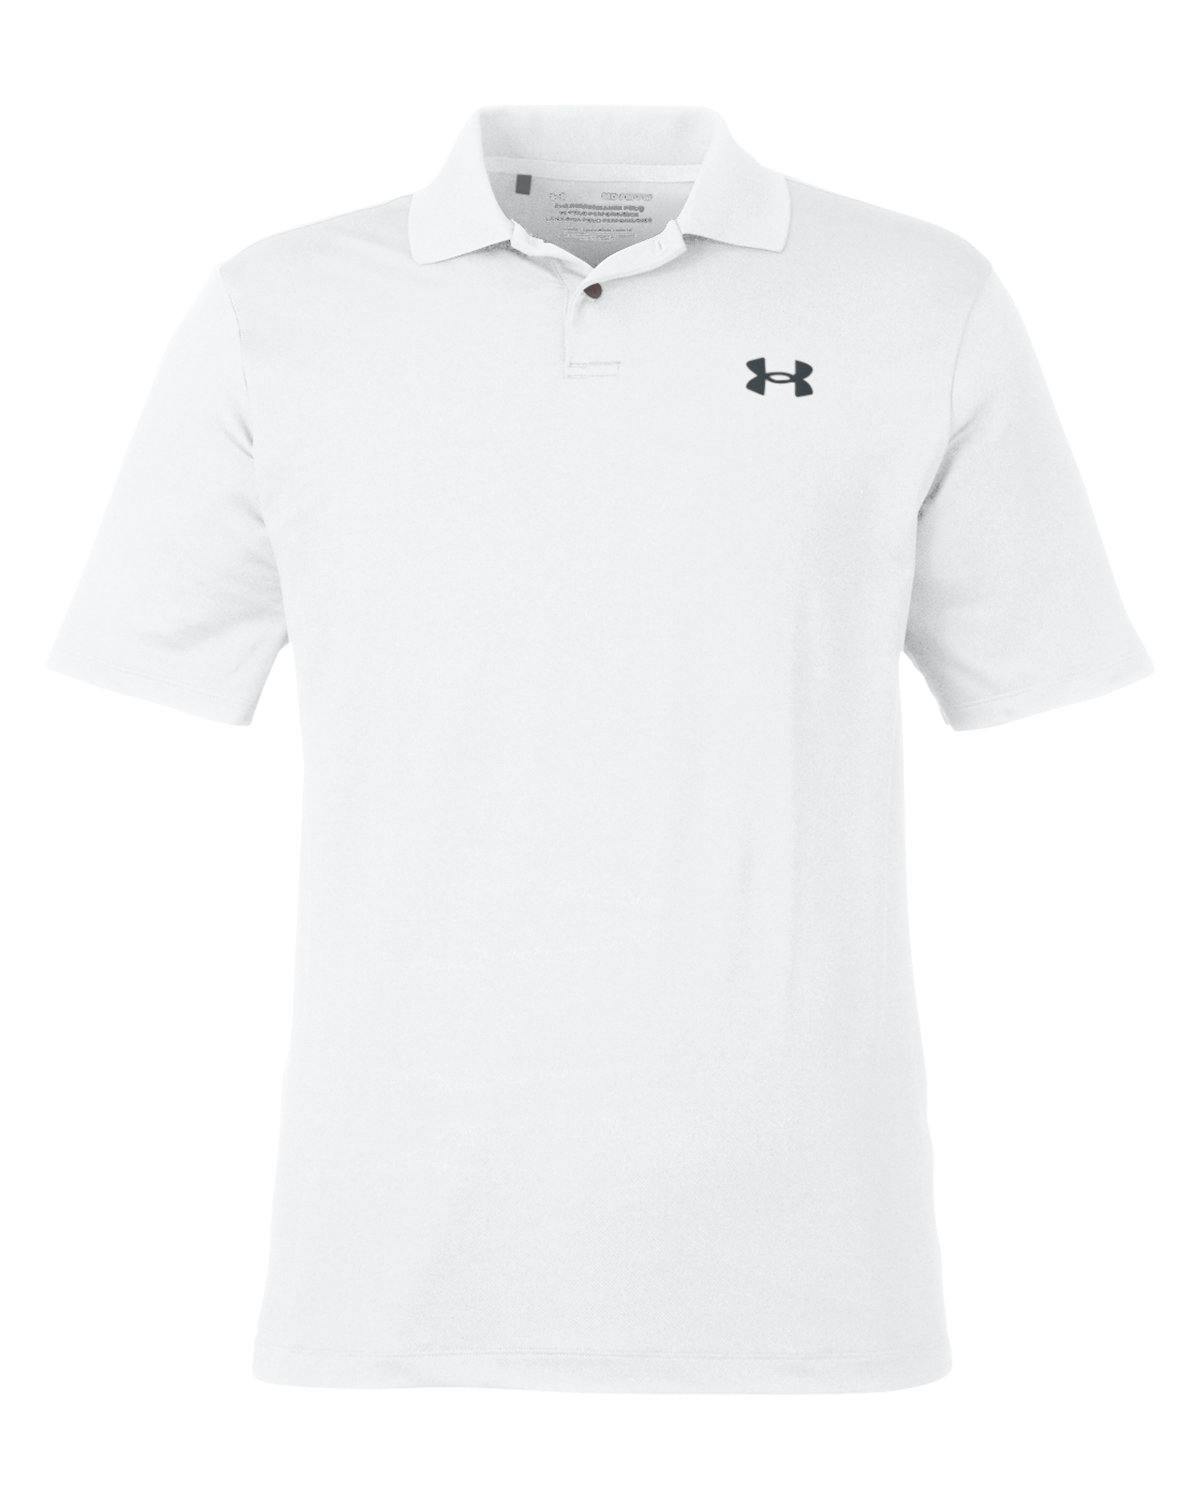 Image for Men's Performance 3.0 Golf Polo